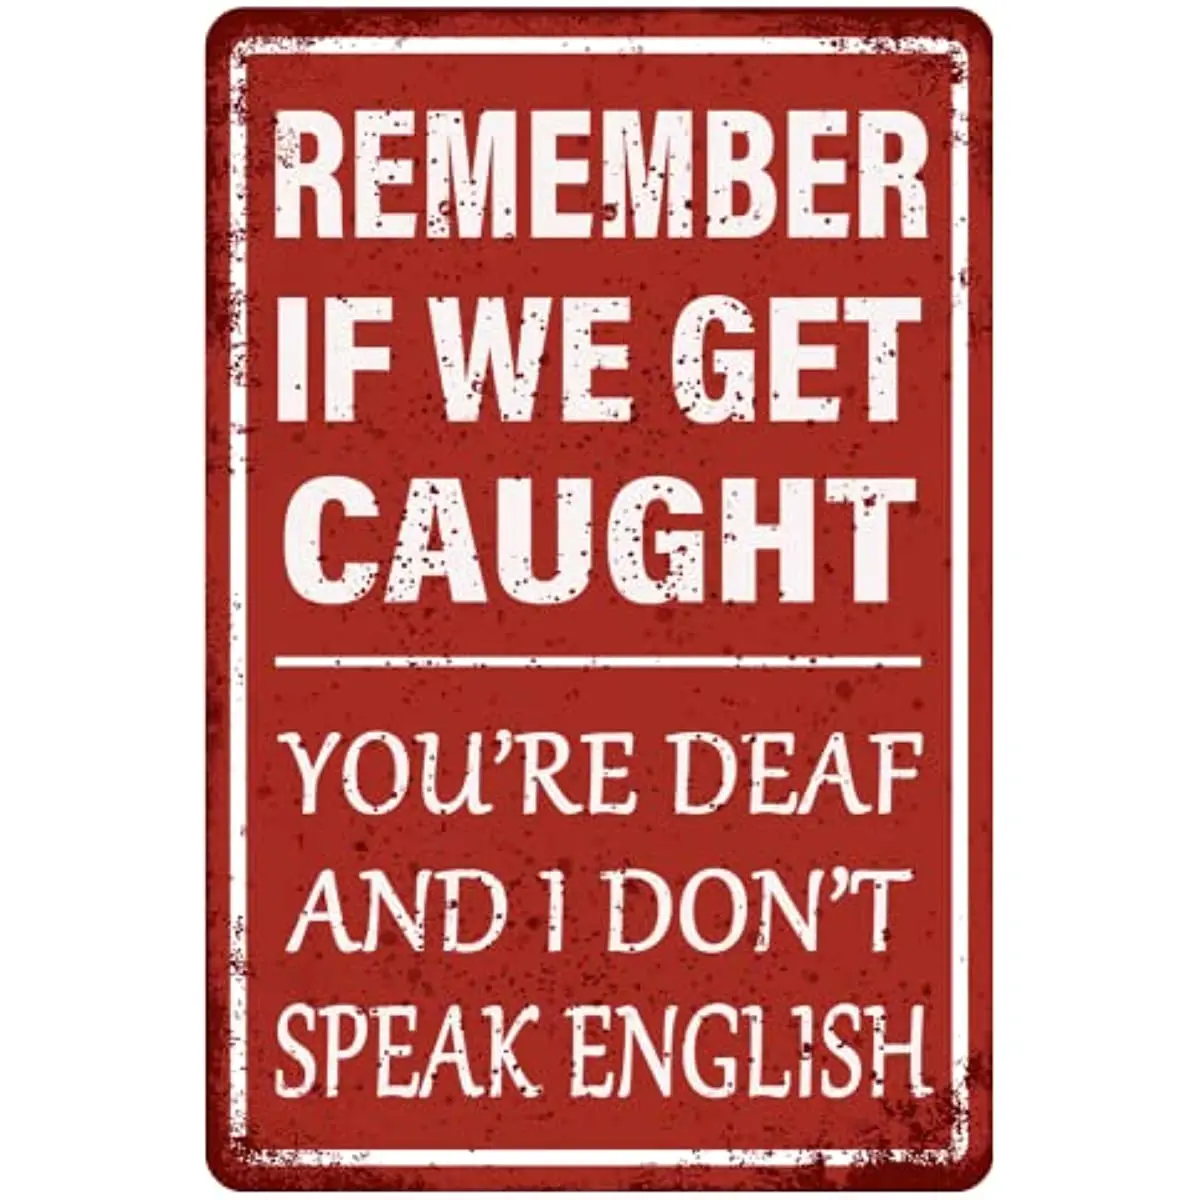 

We Deaf Get Cave Metal Bar Funny Signs, Speak English, Decor If You're Don't Tin Caught Remember Sign Man Humor Garage And